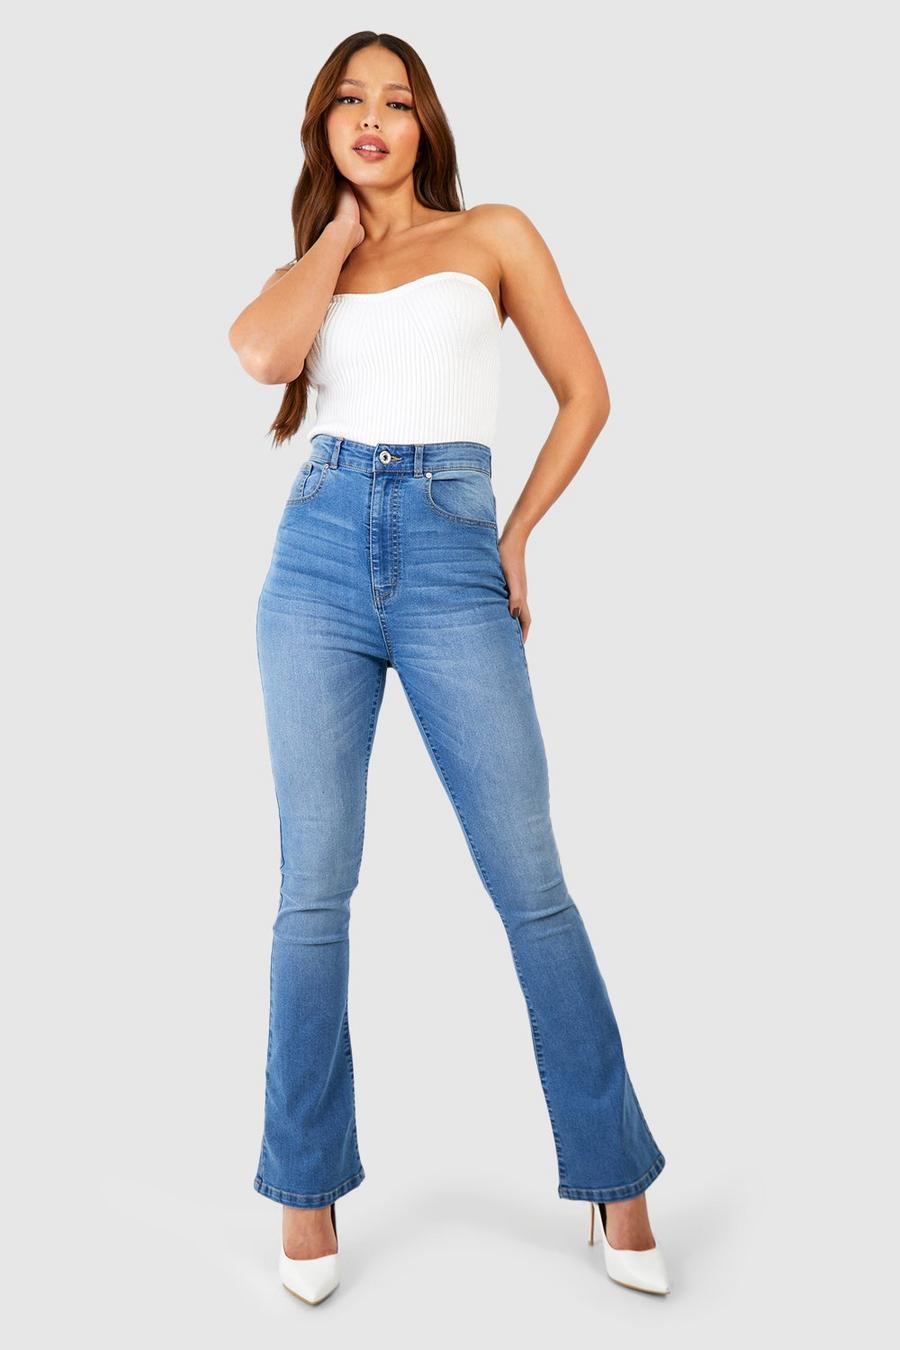 Womens Denim Jean Flare Flared Stretch Bootcut Jeans Size 6 8 10 12 14 16  New